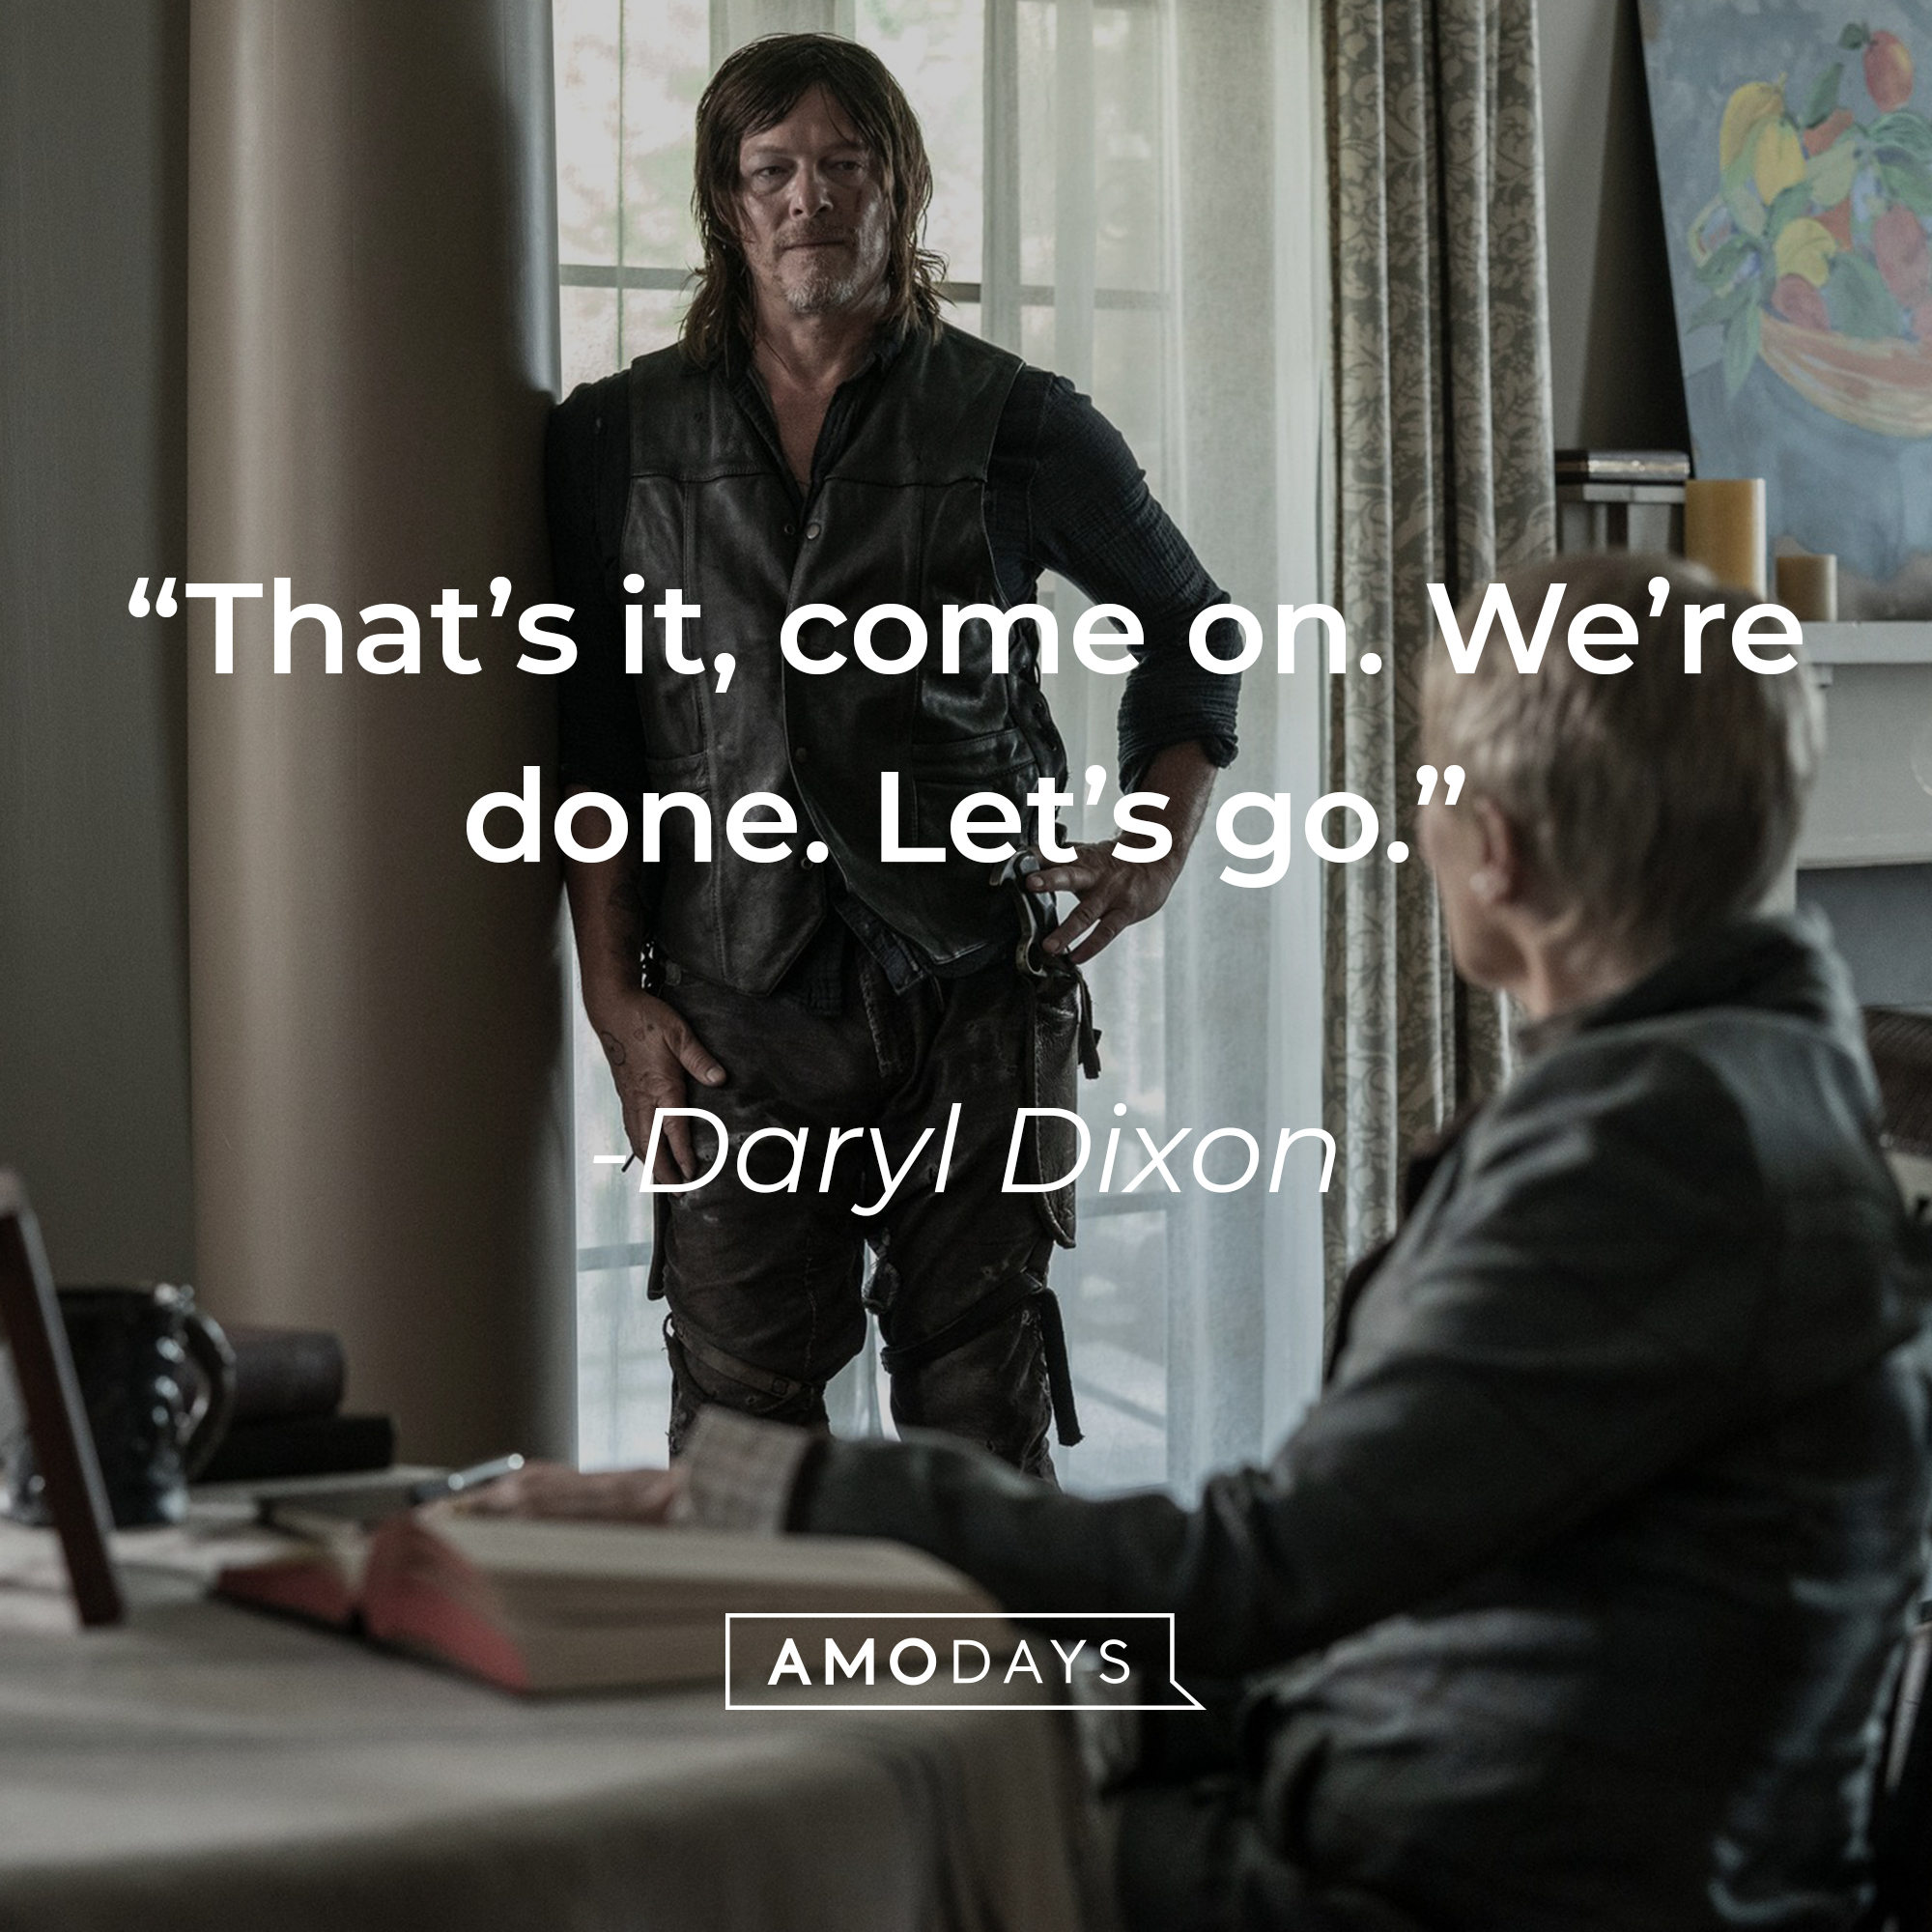 An image of Daryl Dixon with his quote: “That’s it, come on. We’re done. Let’s go.” | Source: facebook.com/TheWalkingDeadAMC